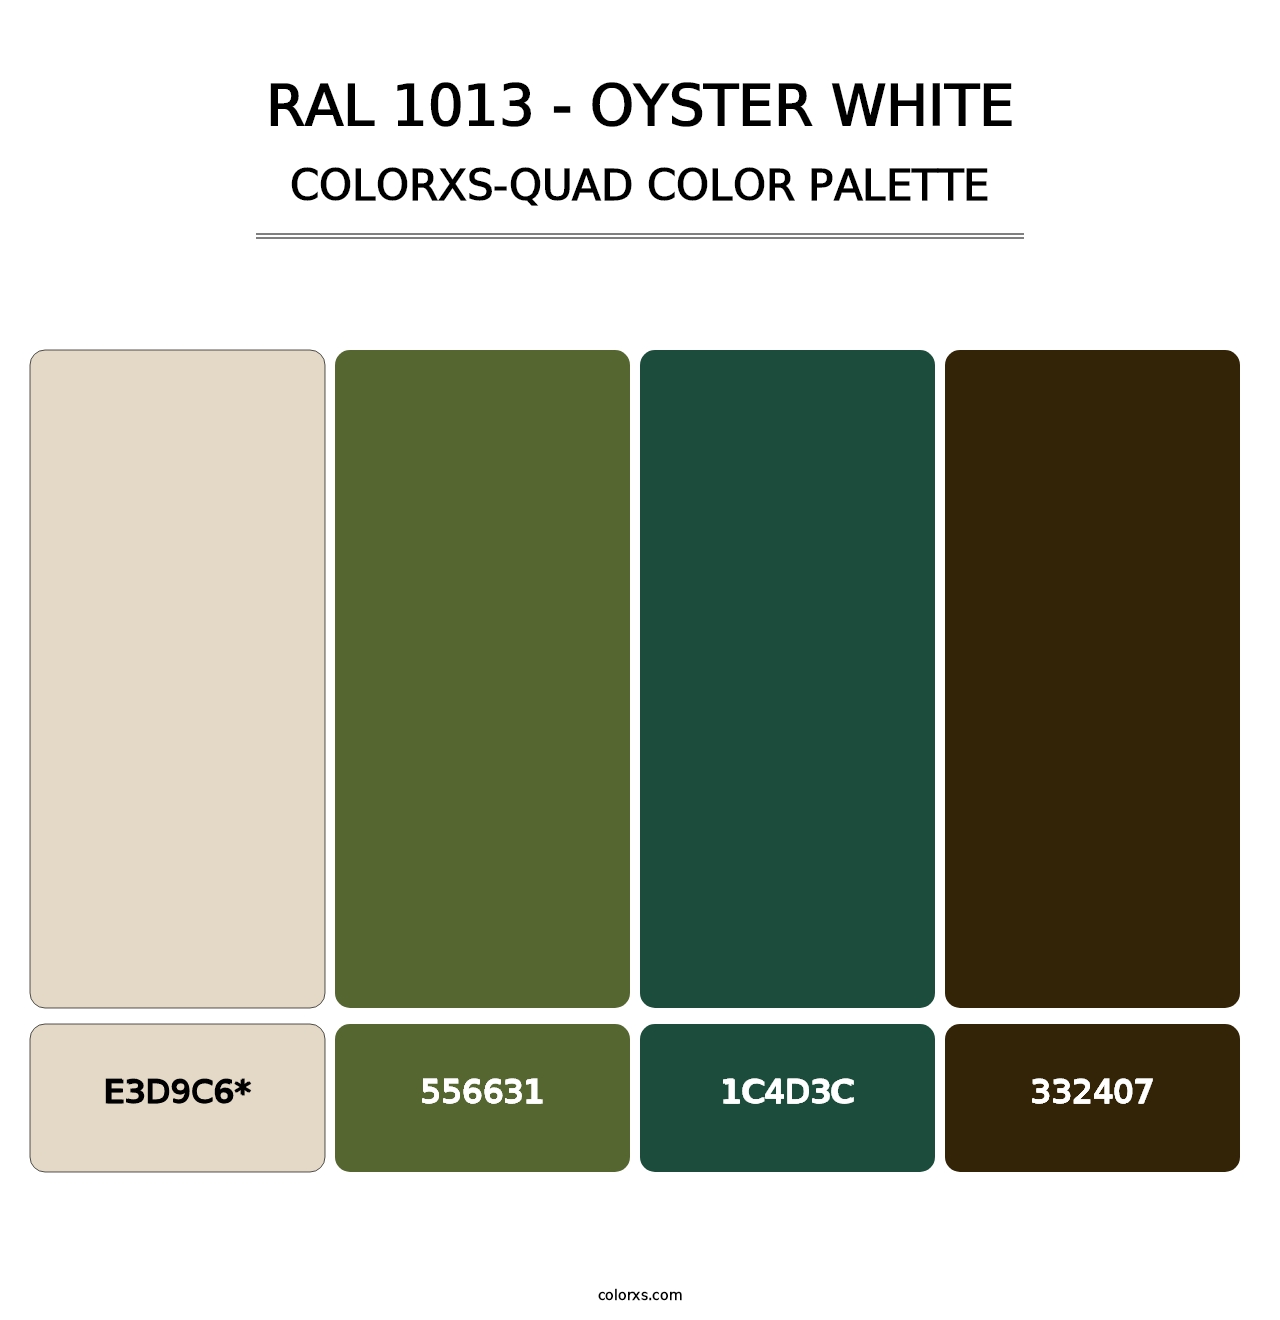 RAL 1013 - Oyster White - Colorxs Quad Palette